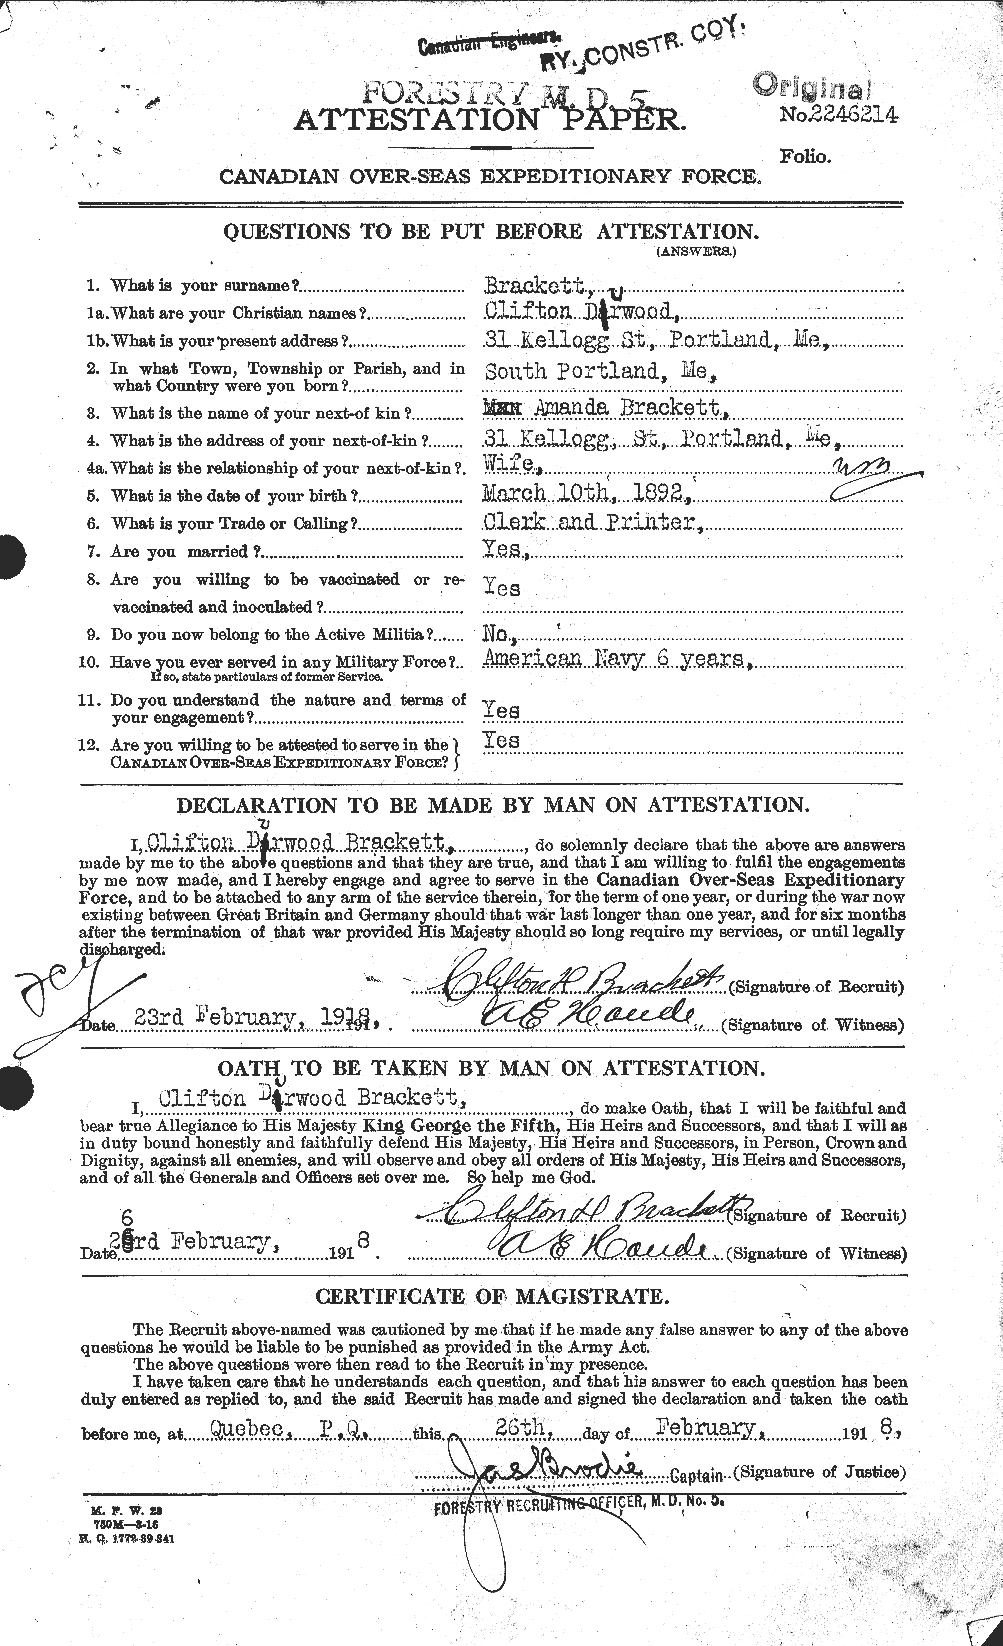 Personnel Records of the First World War - CEF 254730a